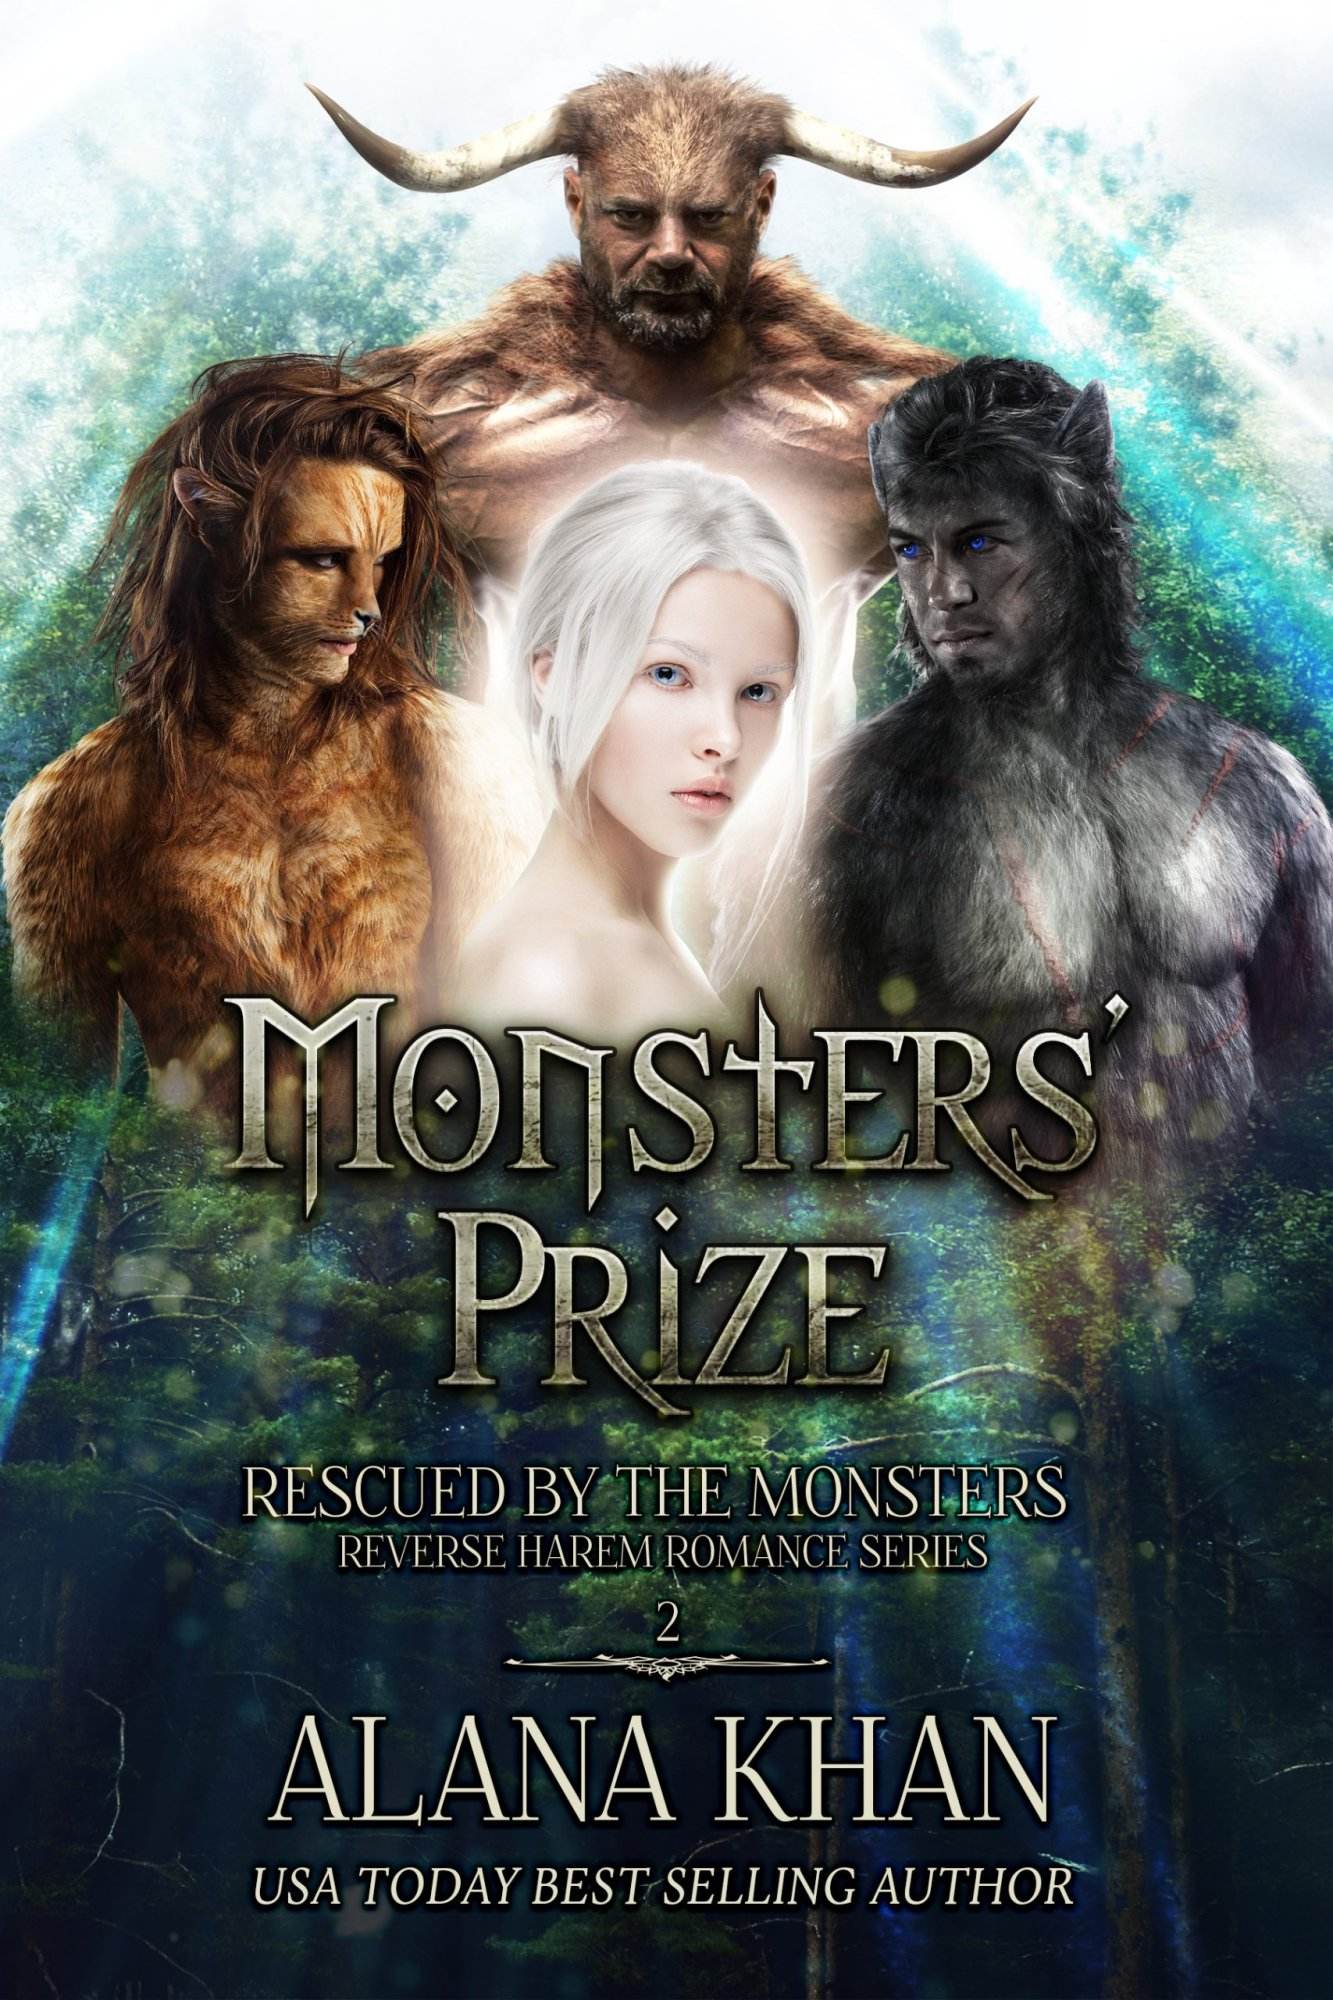 Monsters' Prize